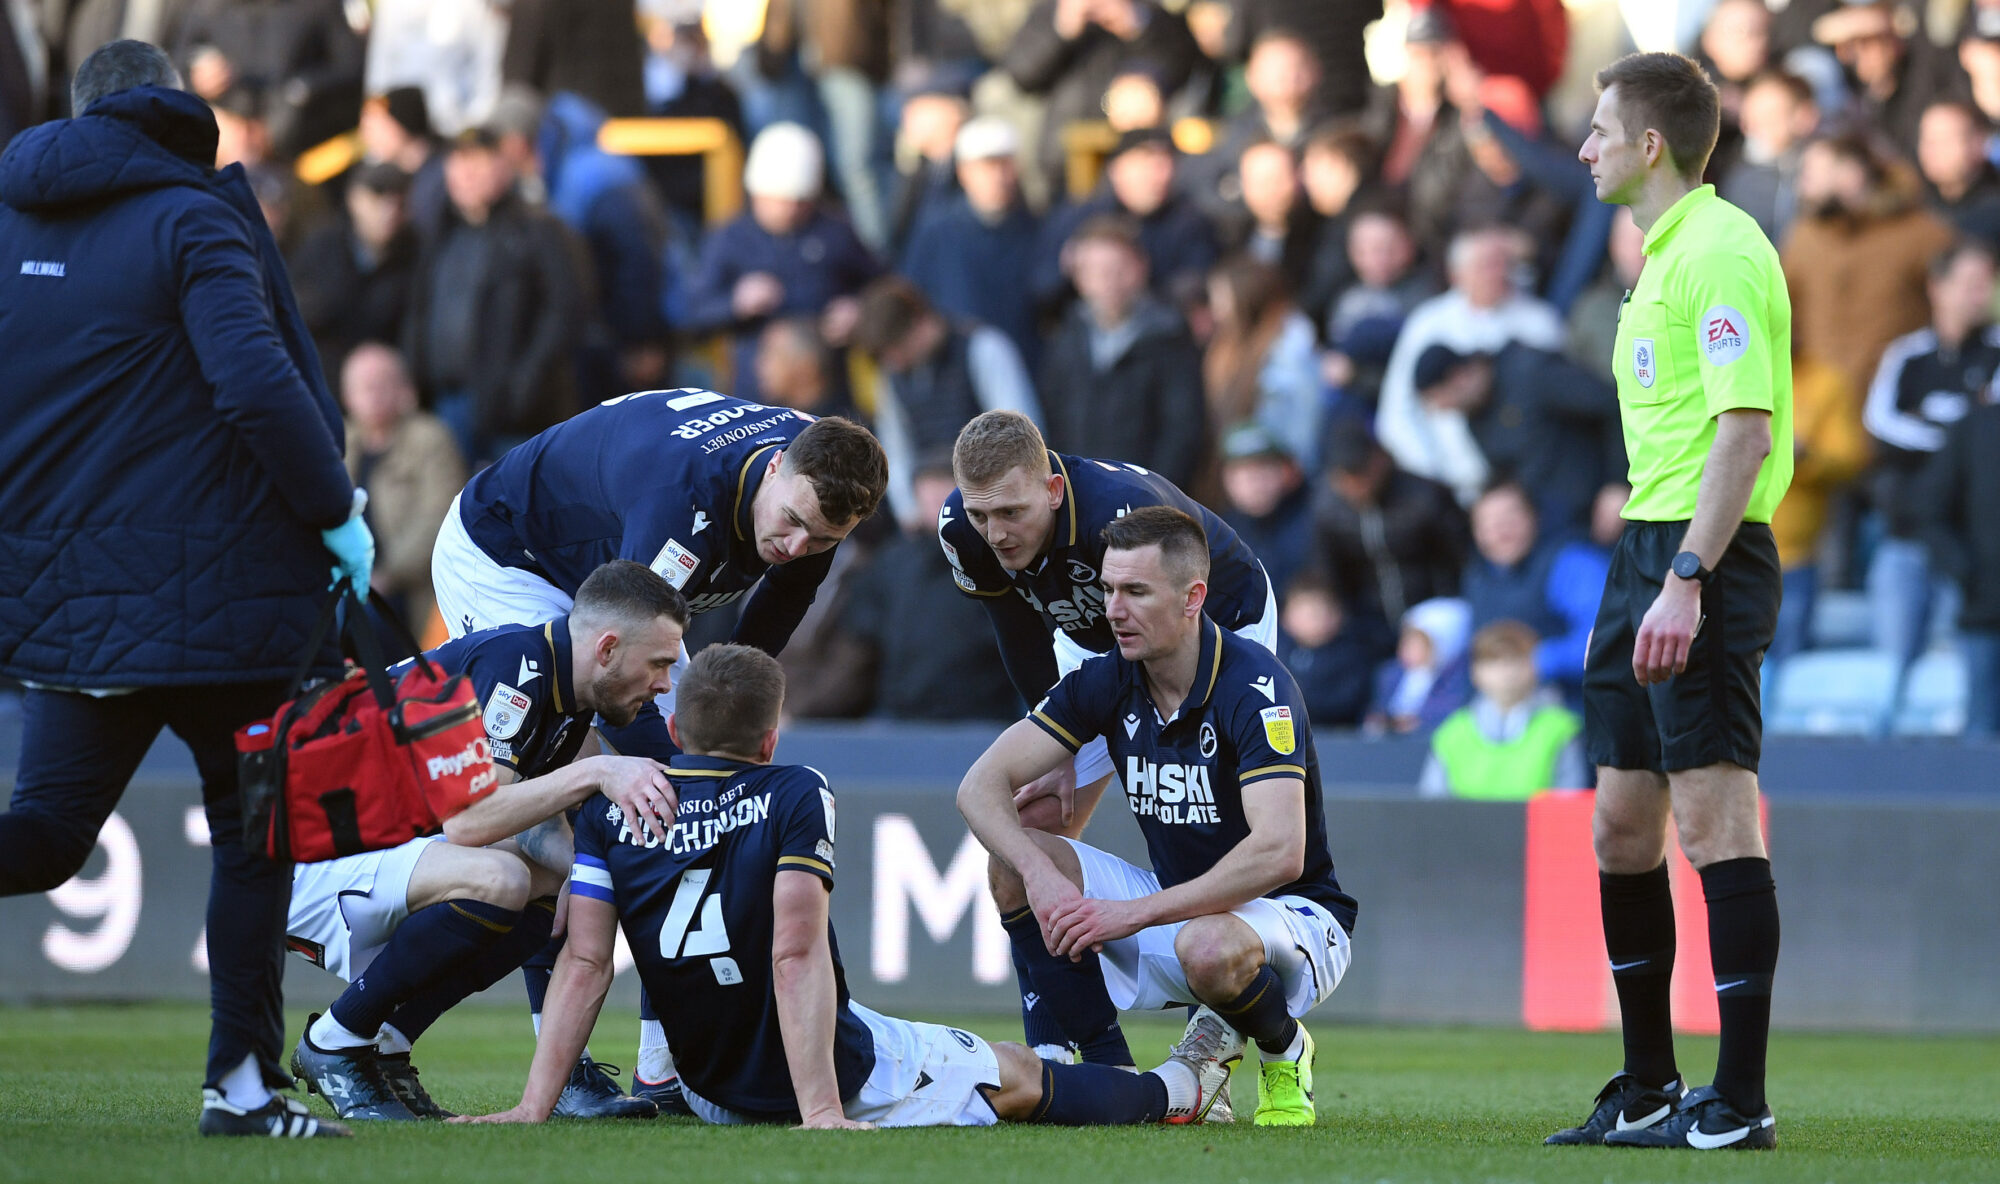 Millwall manager provides injury update on Hutchinson and Bennett – South London News